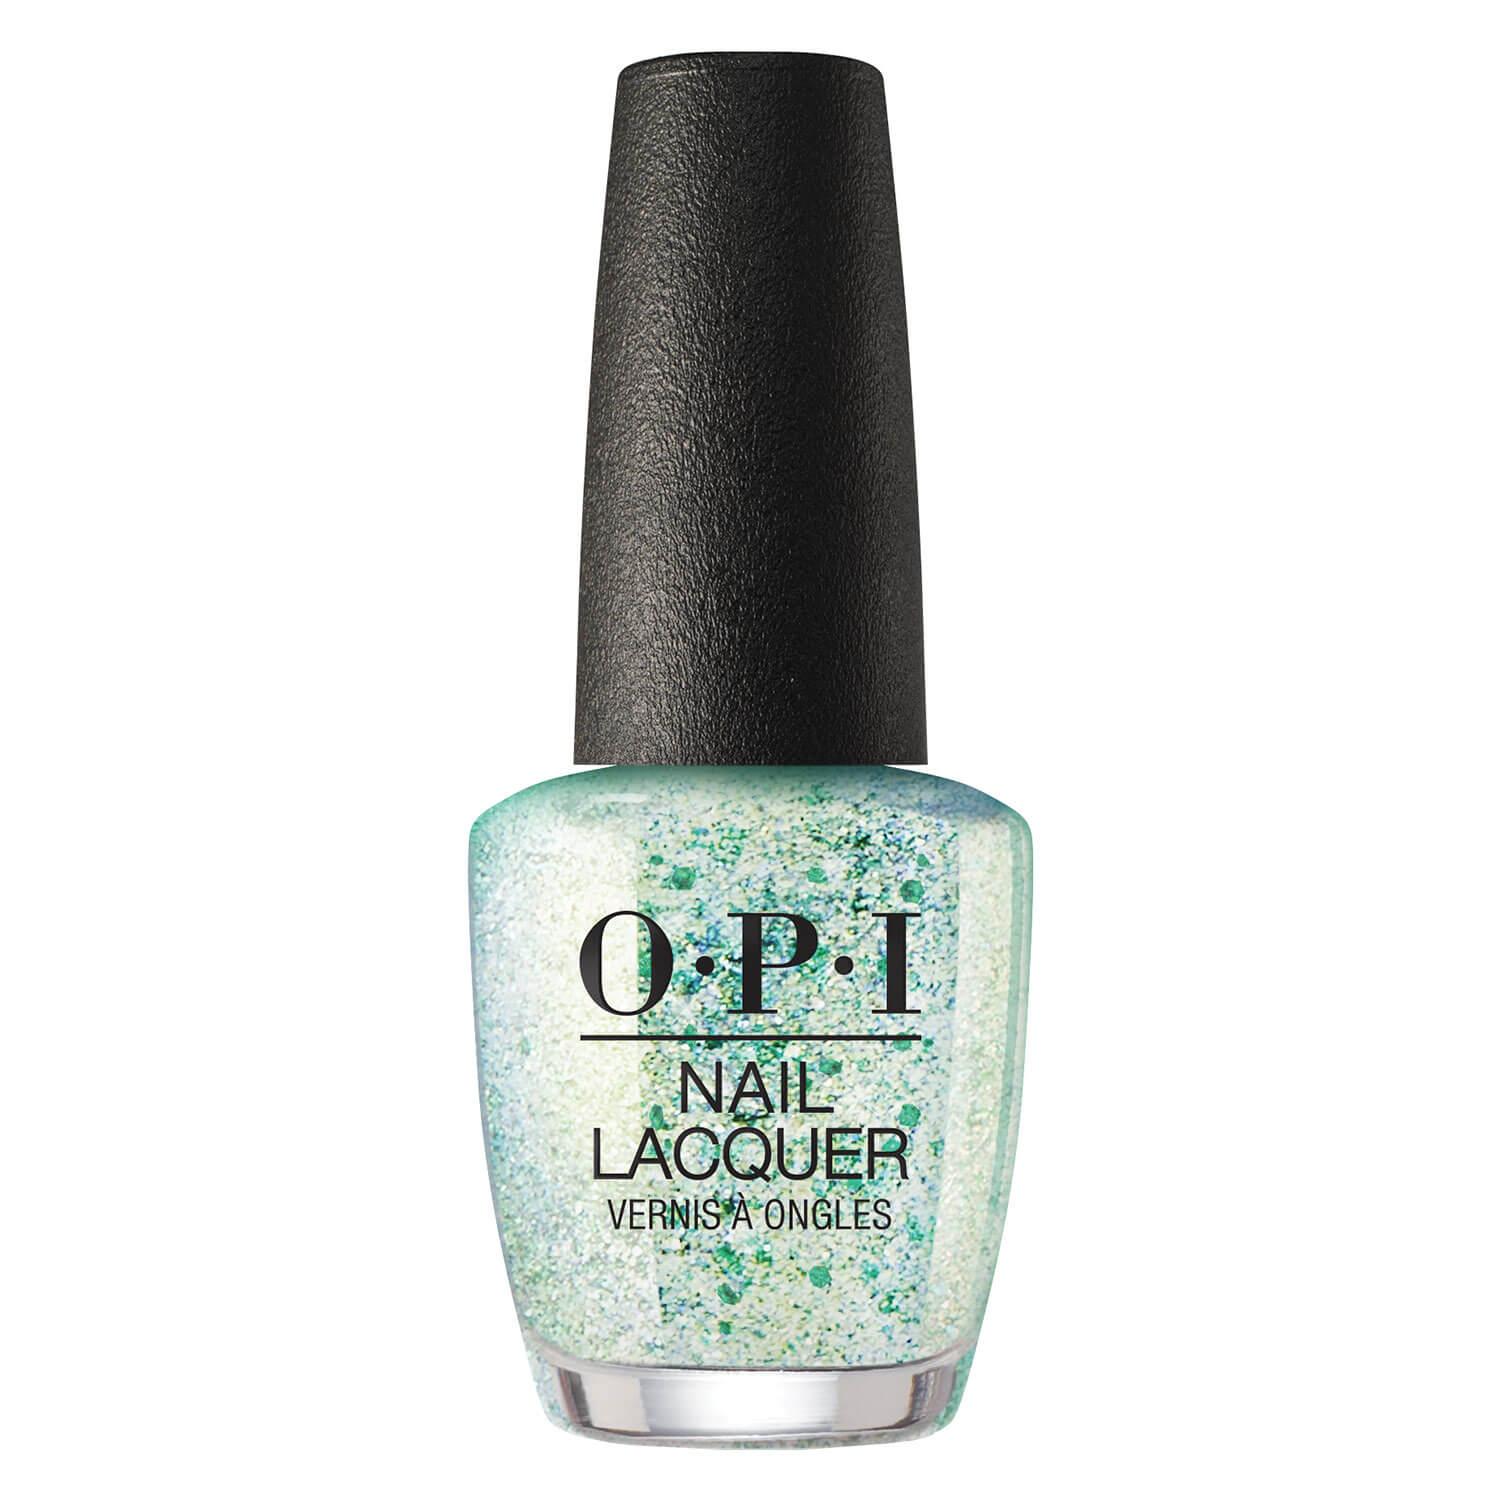 Glitter by OPI - Can't Be Camouflaged!